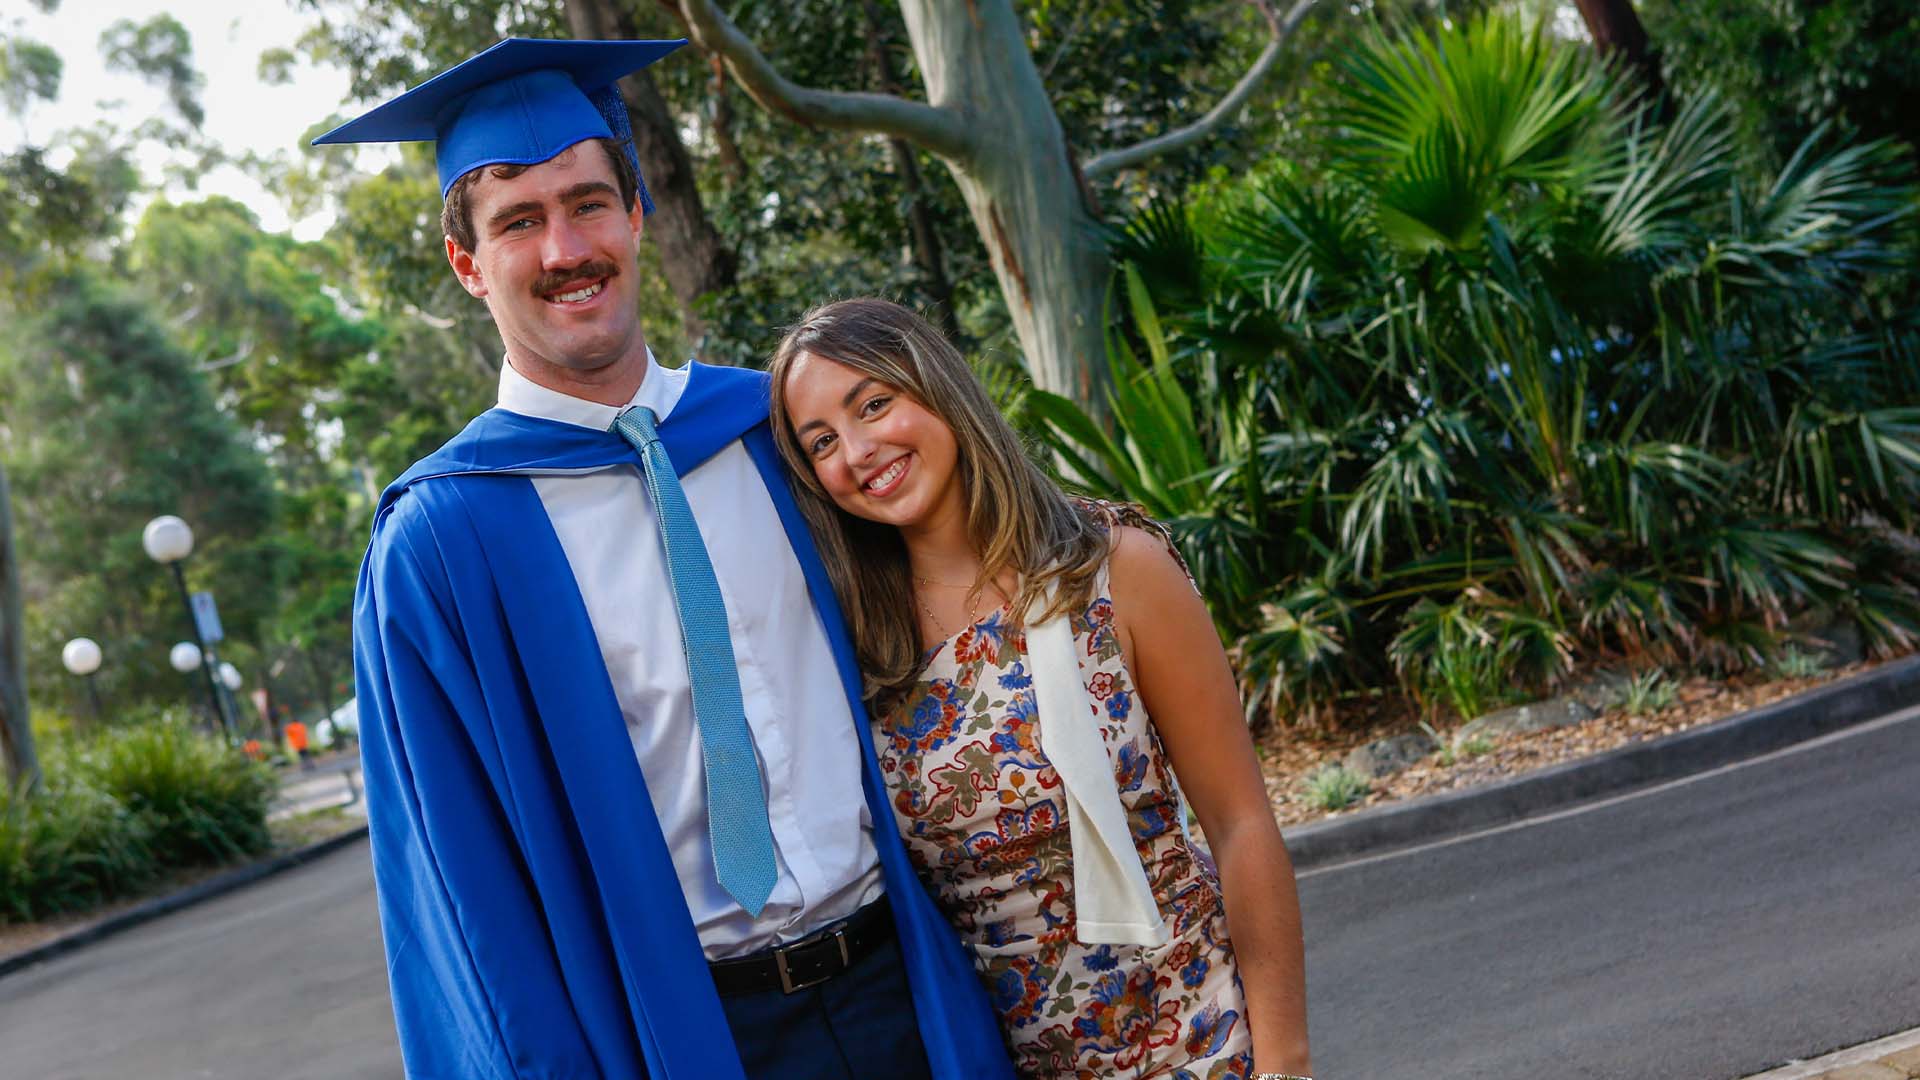 UOW graduate Seamus King poses with his girlfriend